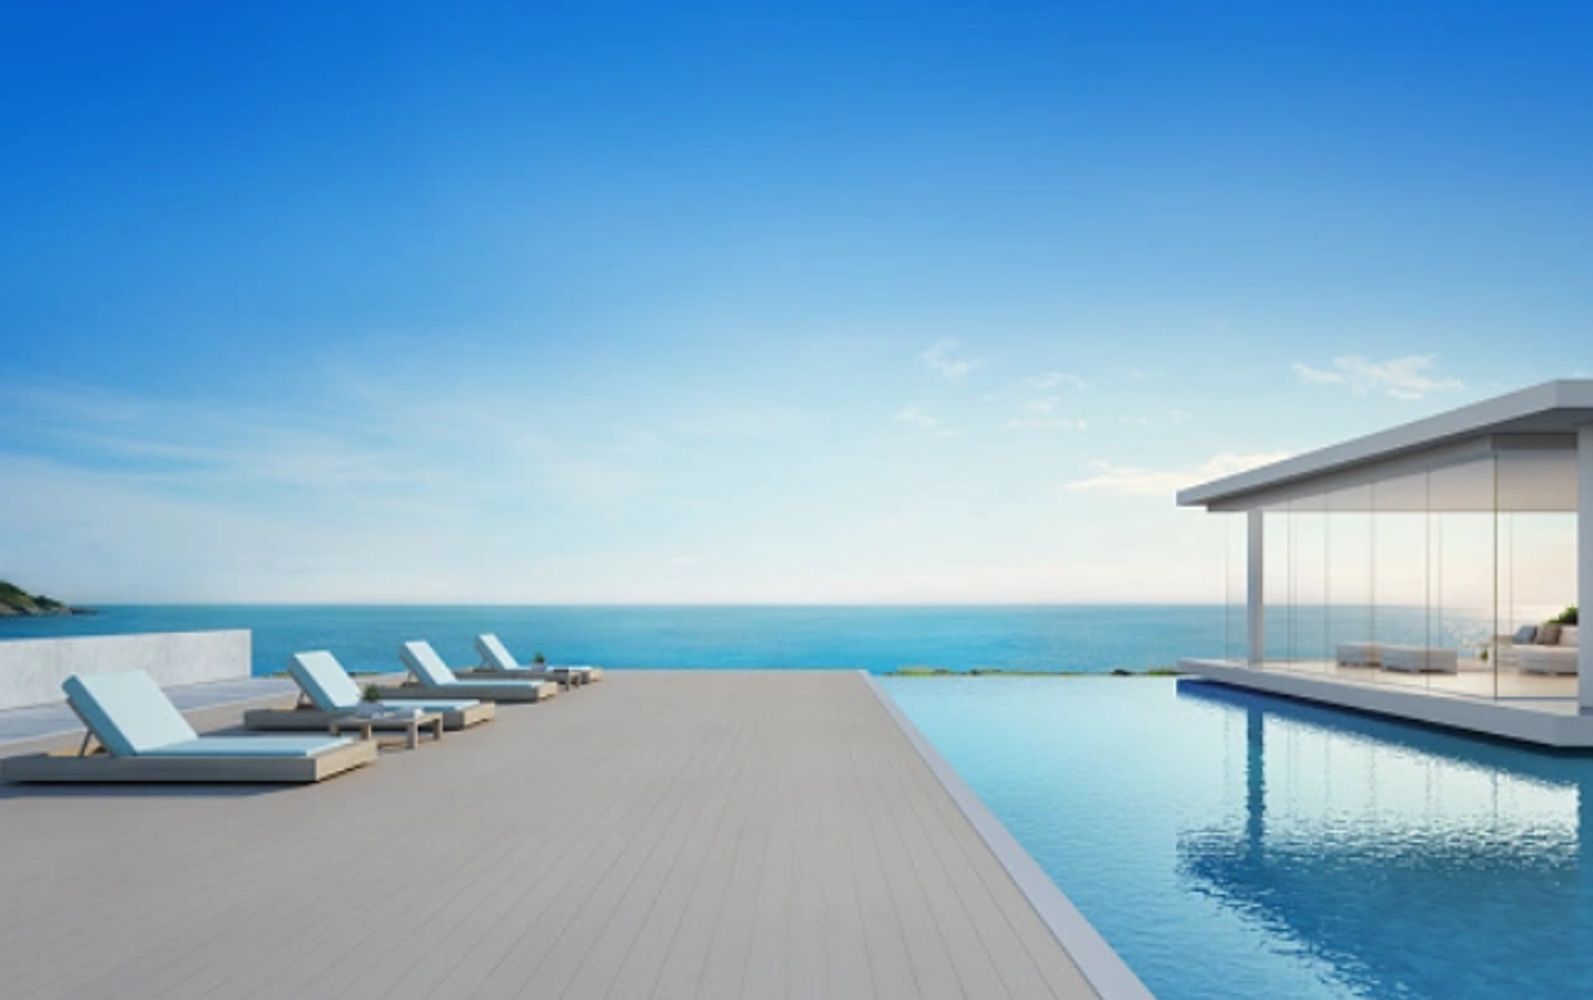 Serene pool deck scene showing deck, glass front adjacent building, lounge chairs, and ocean beyond.